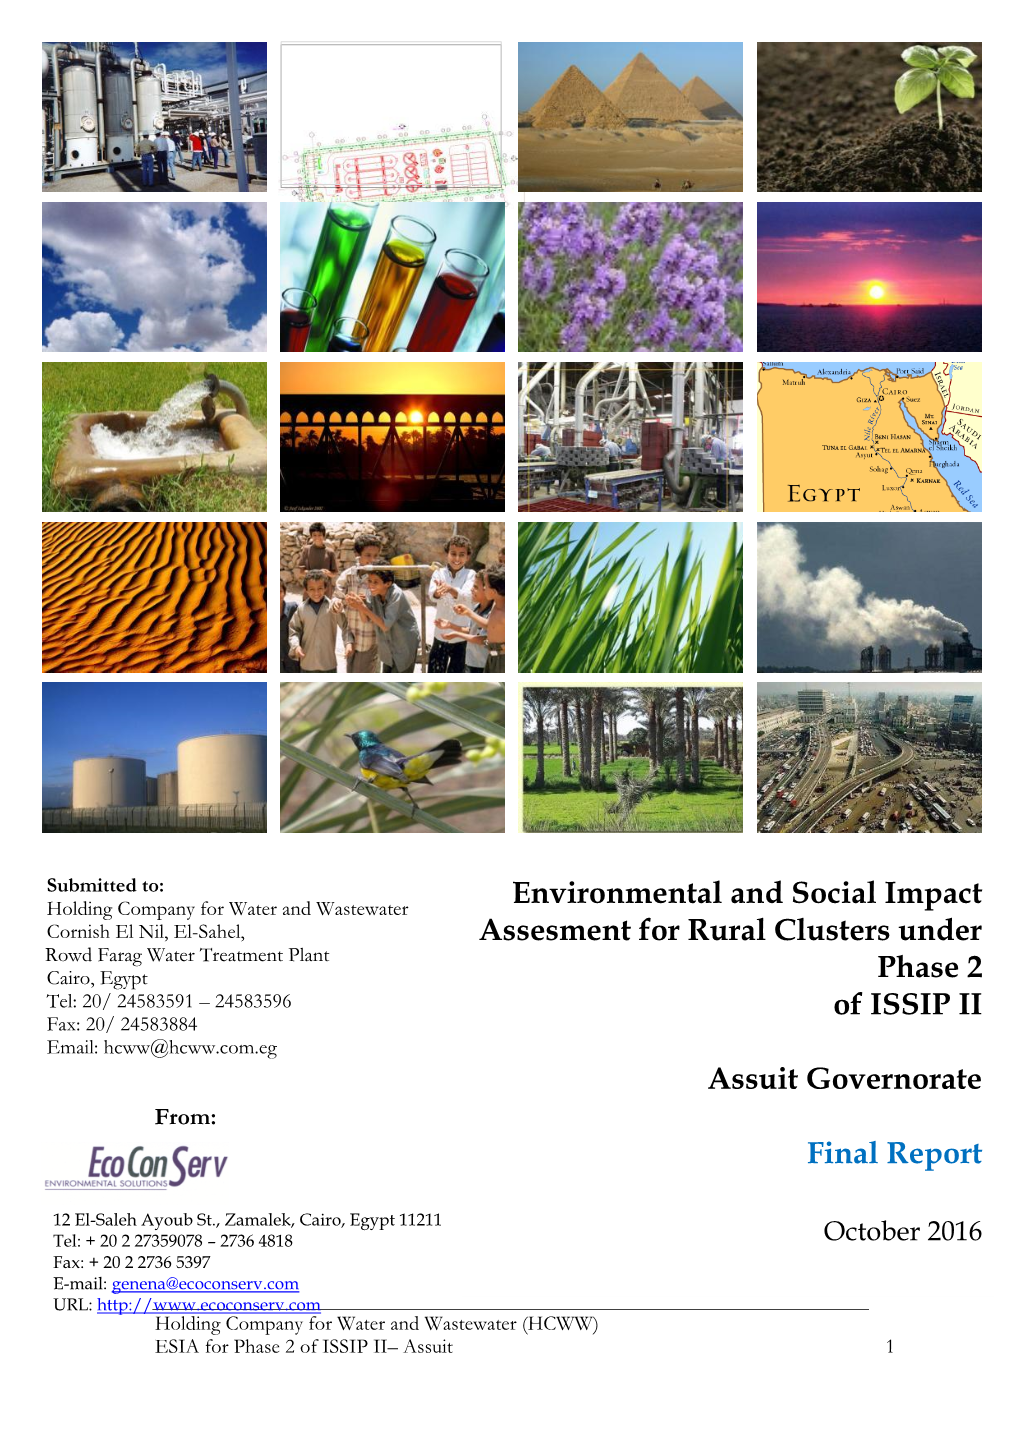 Environmental and Social Impact Assesment for Rural Clusters Under Phase 2 of ISSIP II